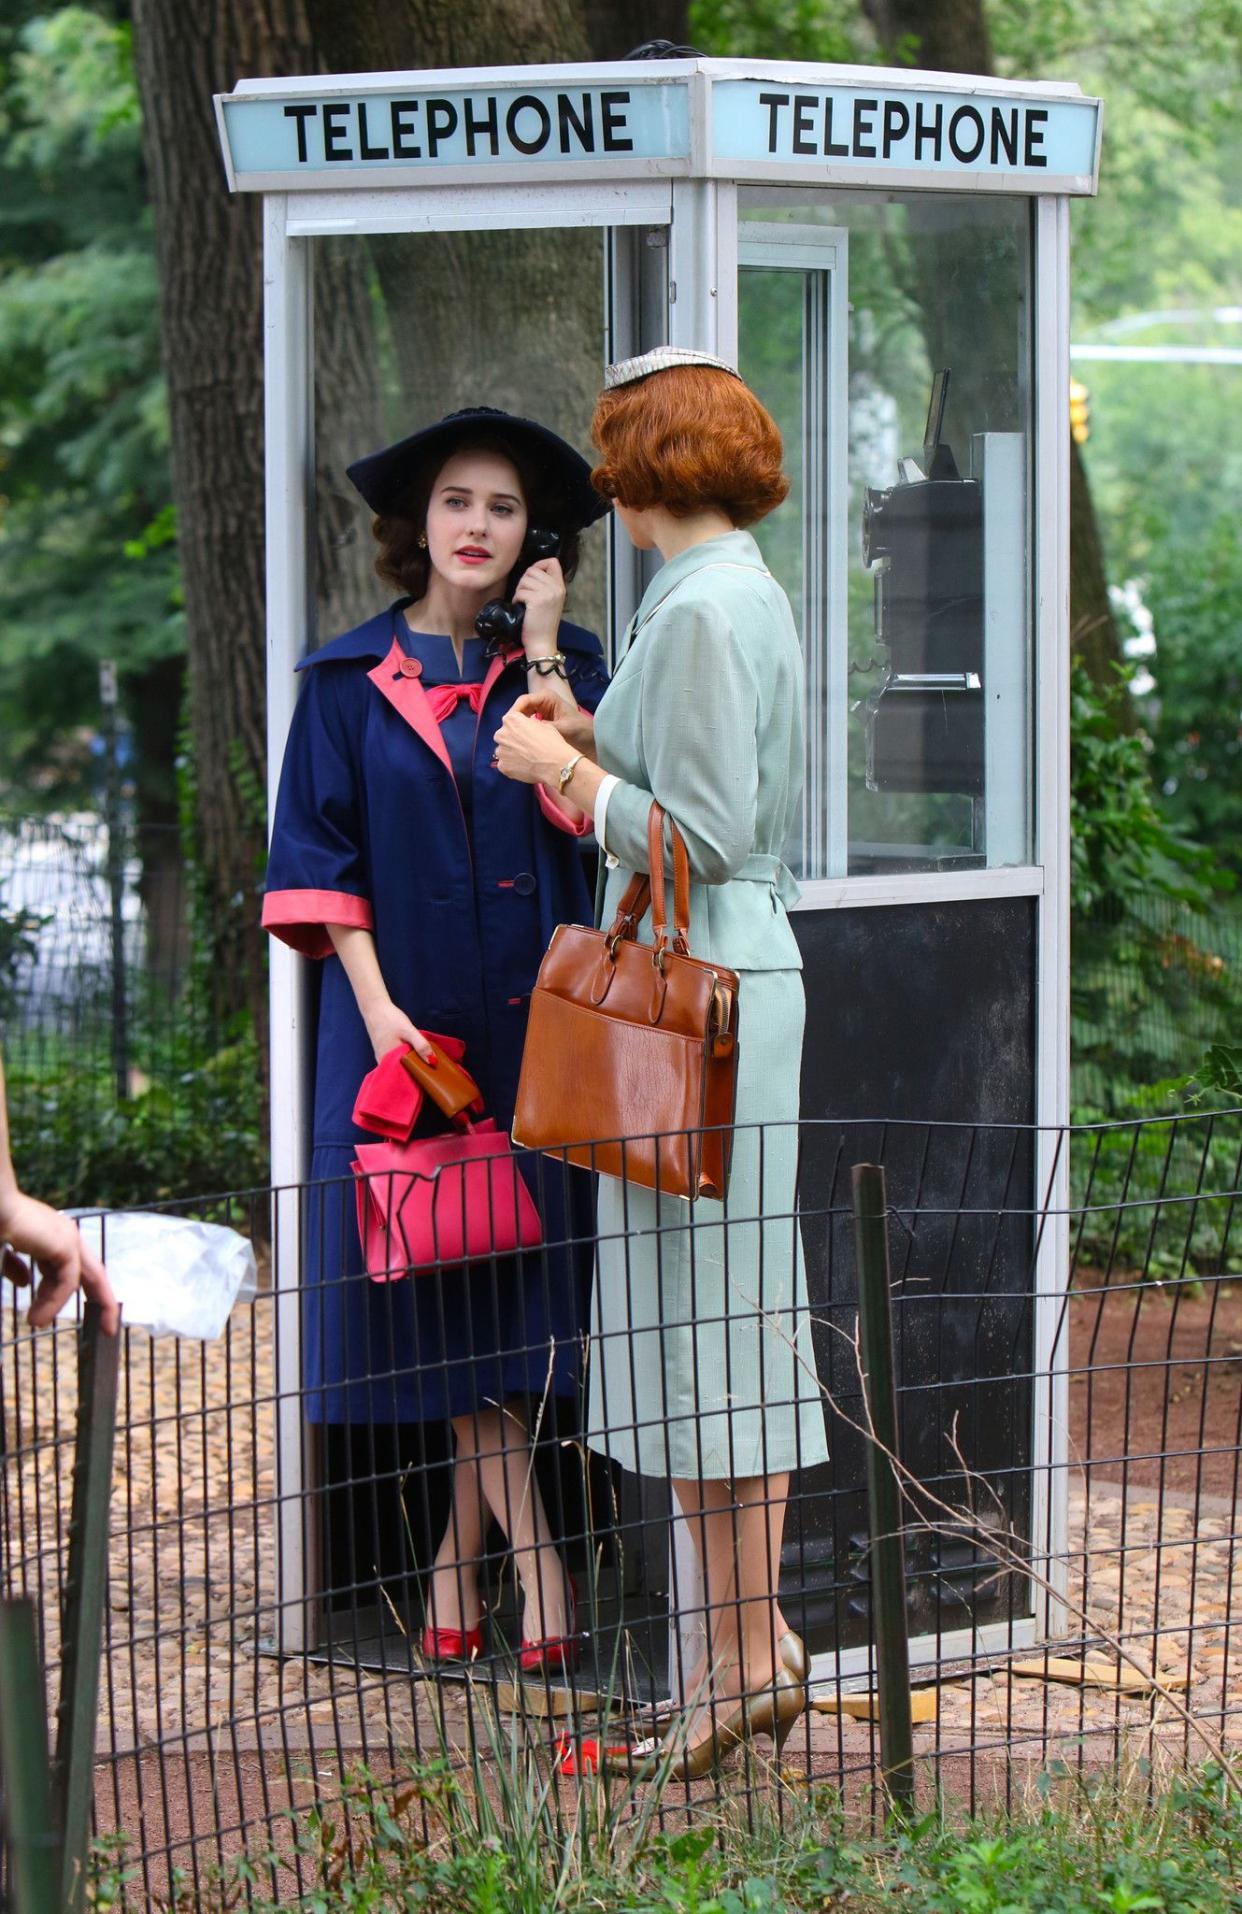 Rachel Brosnahan and a co-star use an old-fashioned telephone booth during a scene for the upcoming season of "The Marvelous Mrs. Maisel" in New York City.